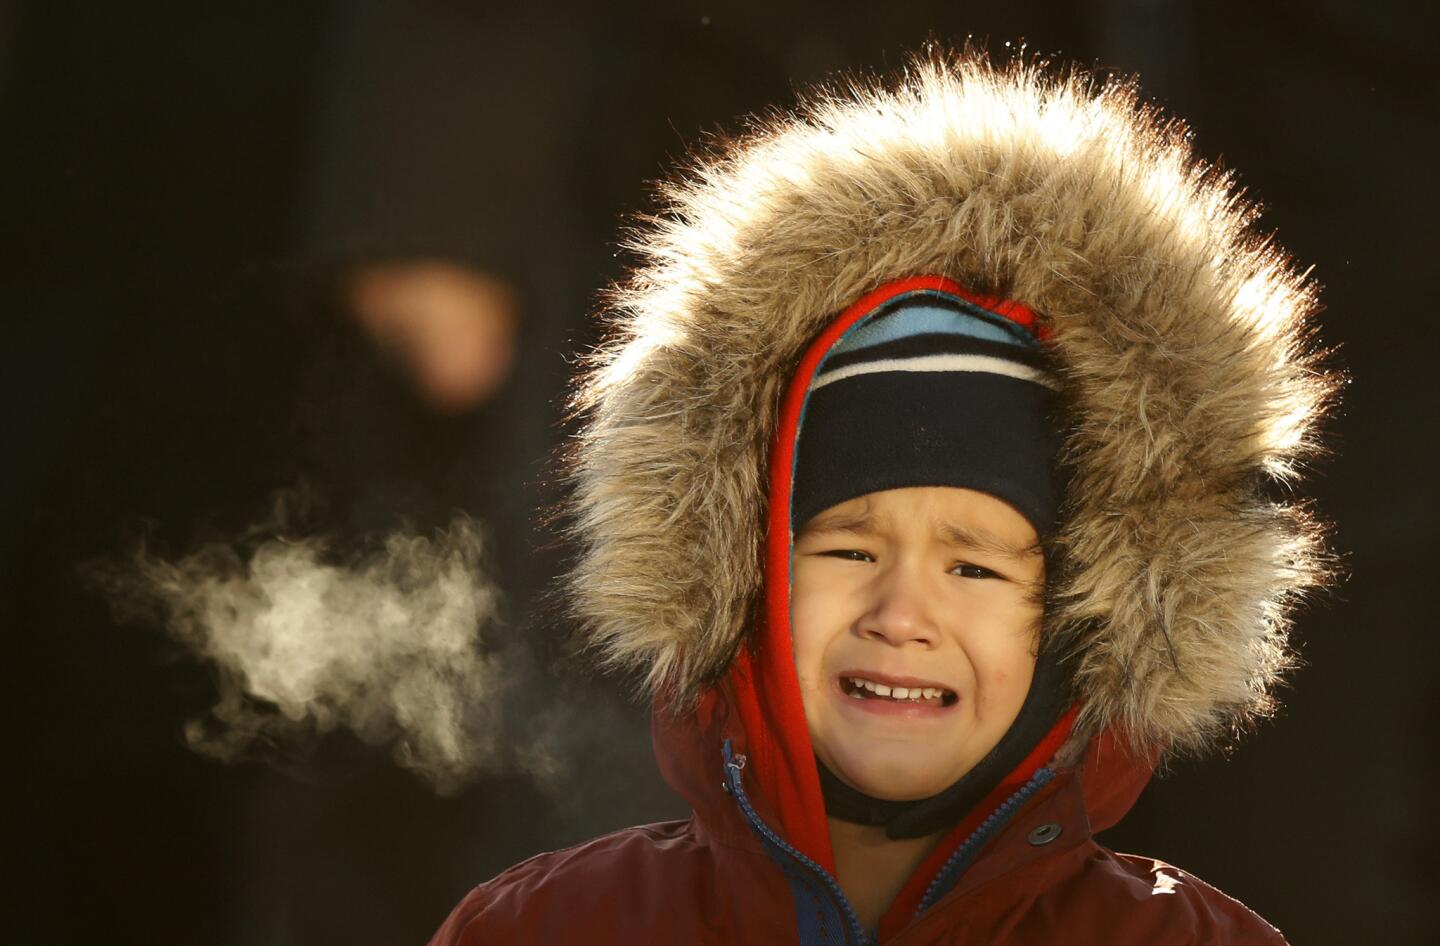 Cold snap hits Midwest and Northeast